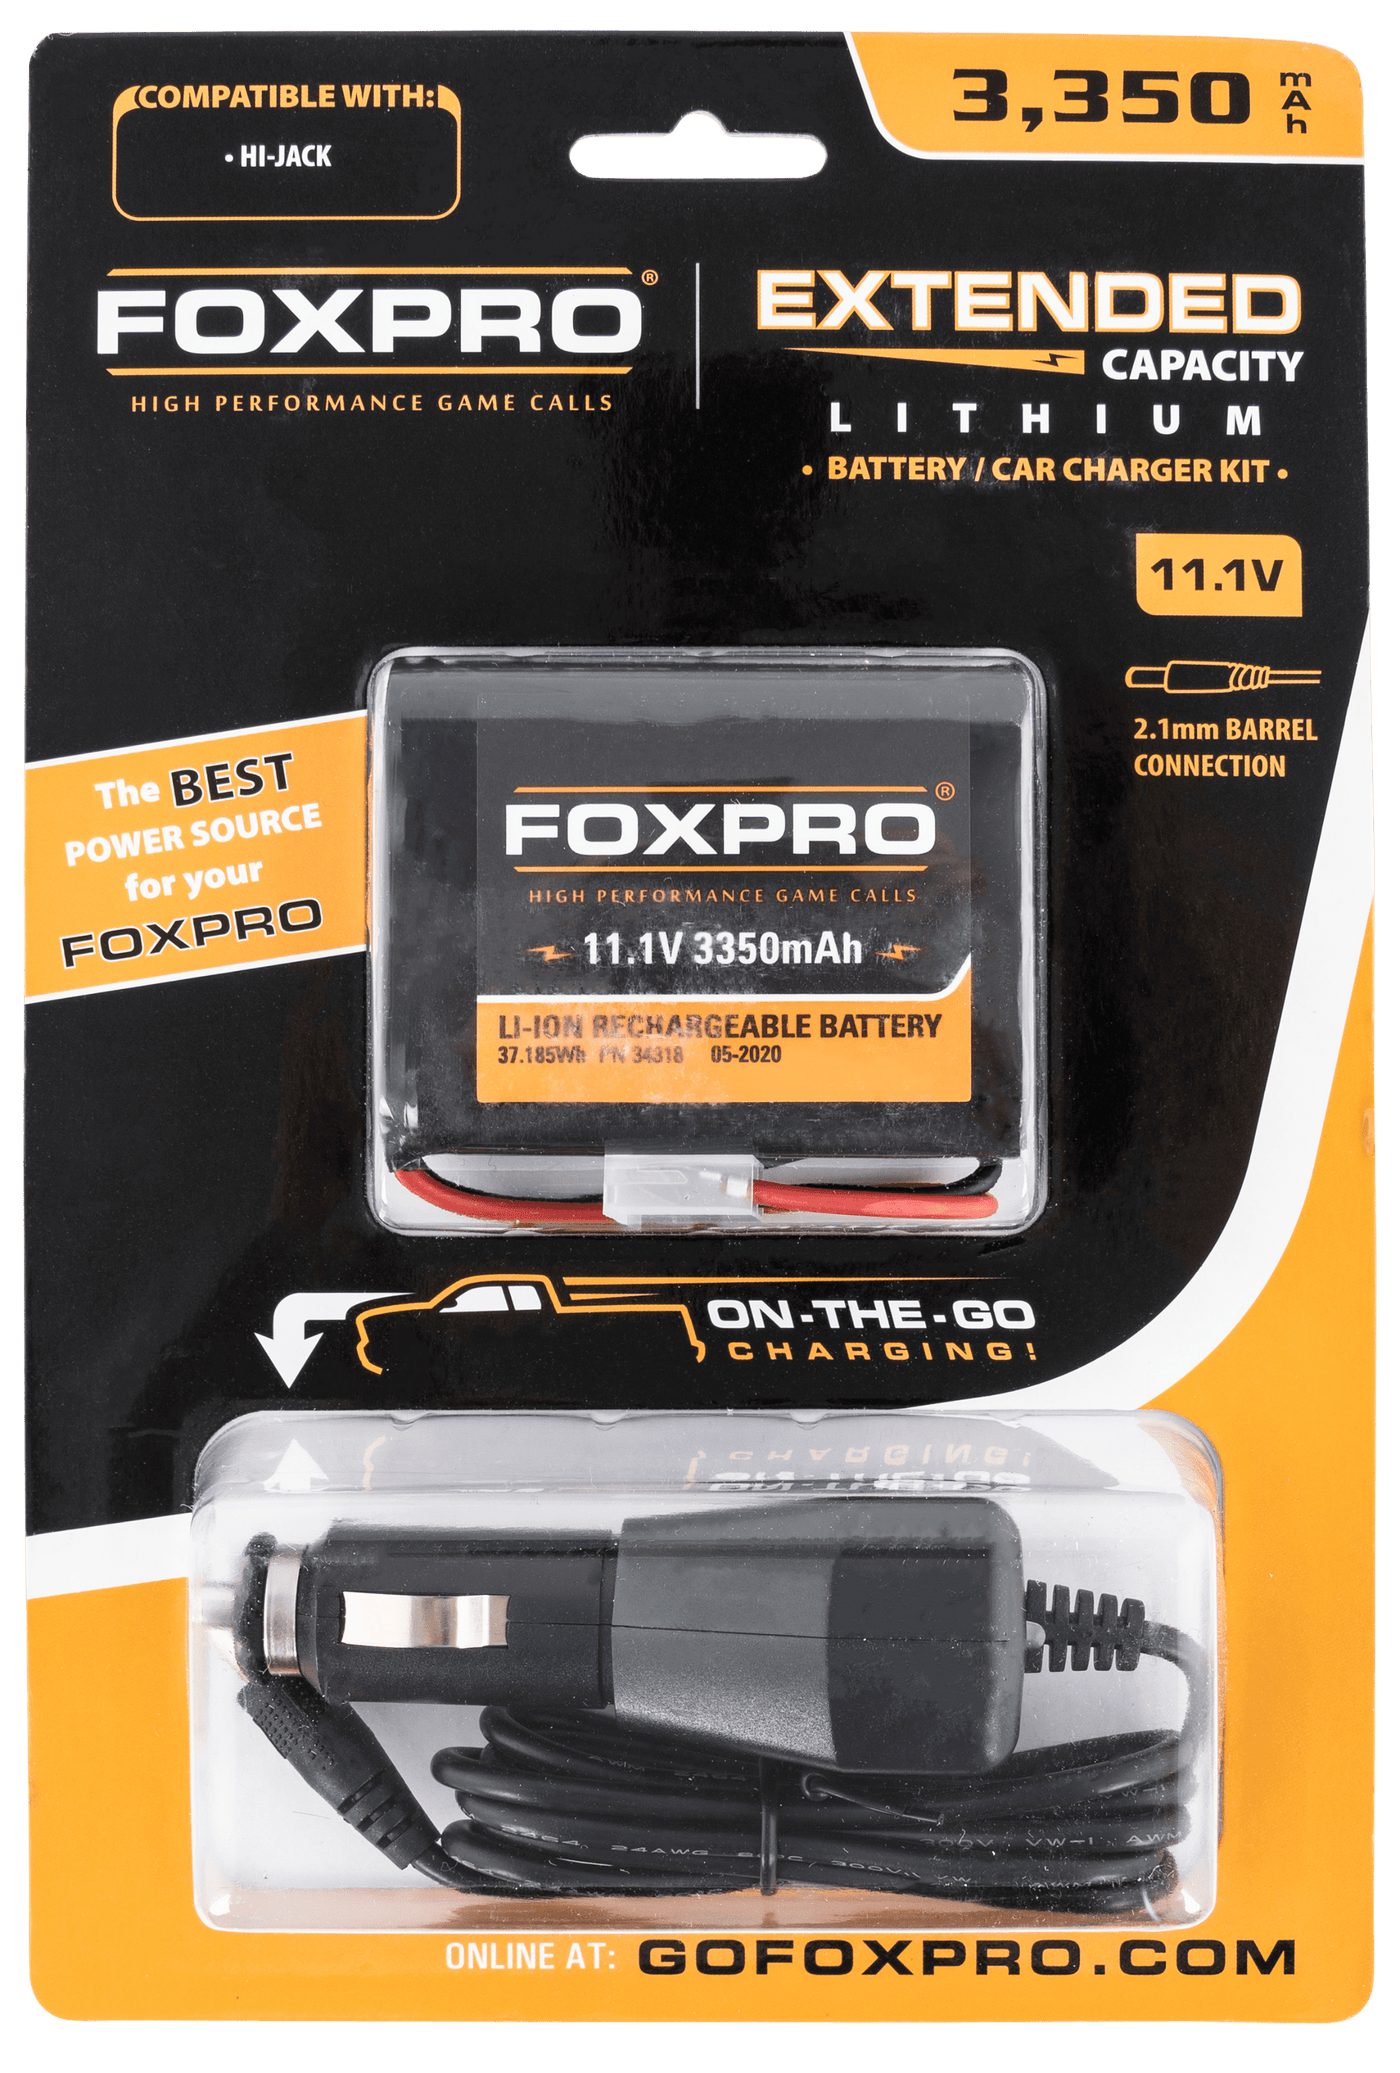 Foxpro Foxpro Extended Capacity Battery & Car Charger, Foxpro  Extbattchgrake Ext Cap Battery And Charger Accessories